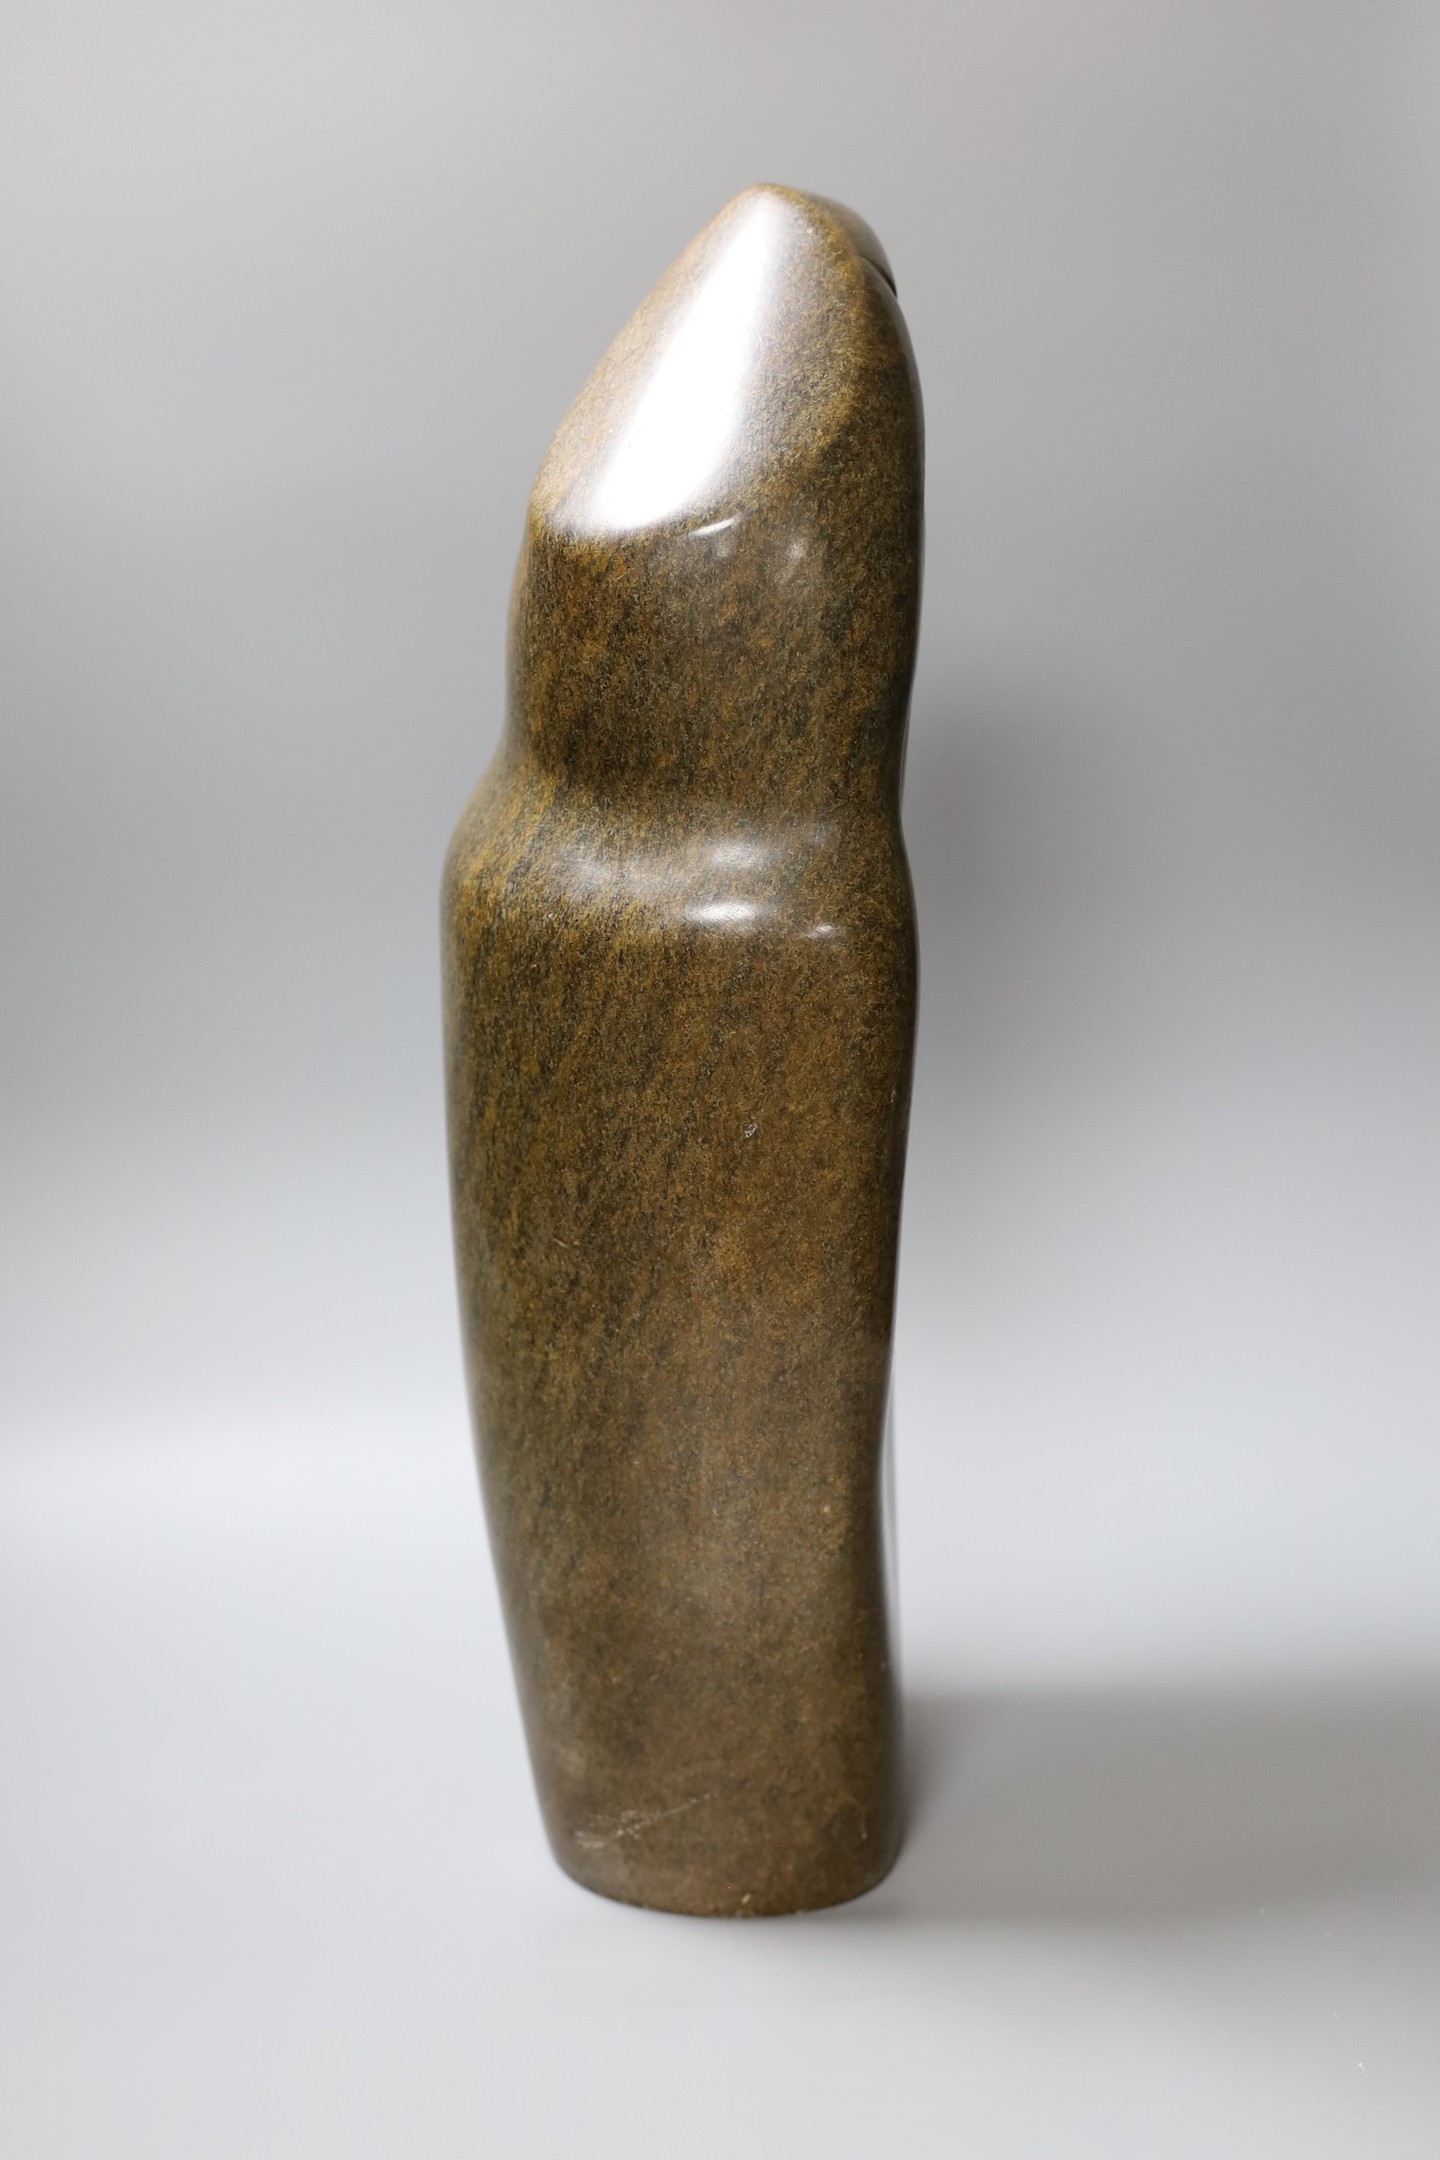 A Zimbabwean carved and polished stone slender abstract figure, 48cm tall